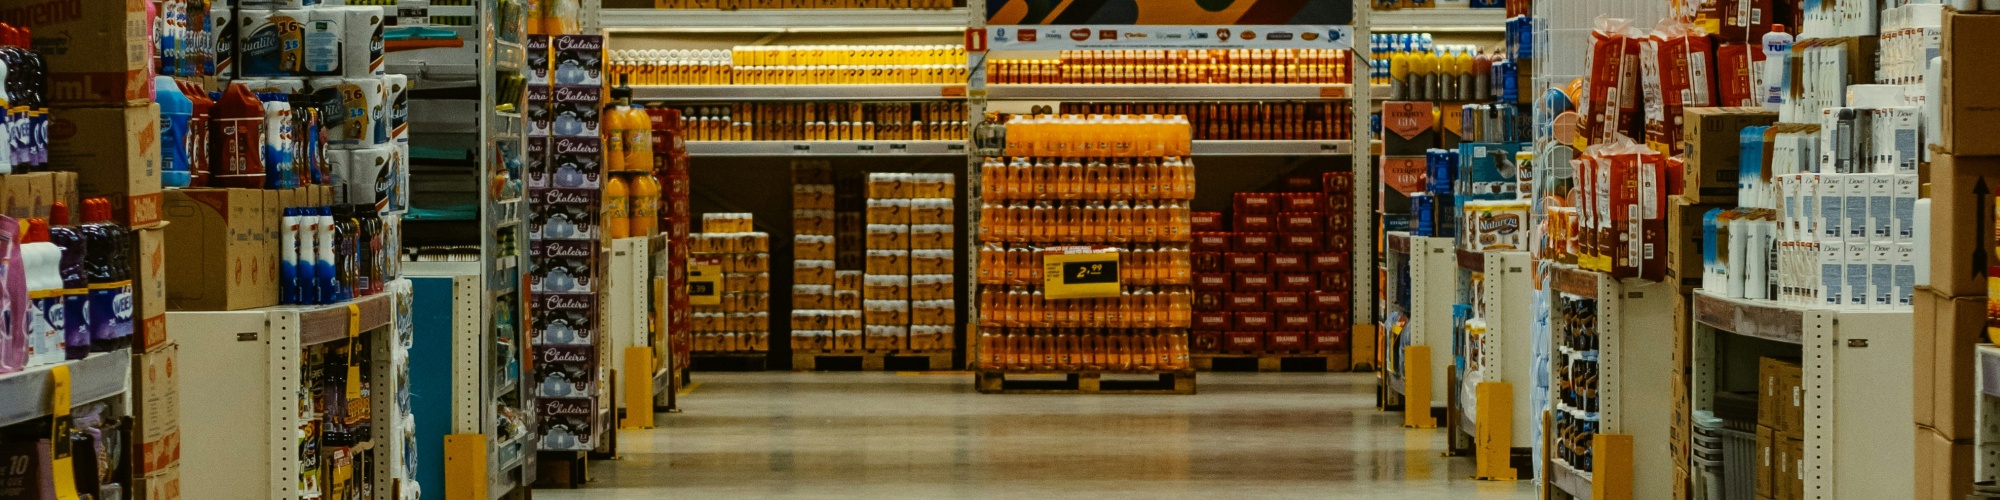 Shelves of food in a grocery store. Photo by Eduardo Soares via Unsplash.